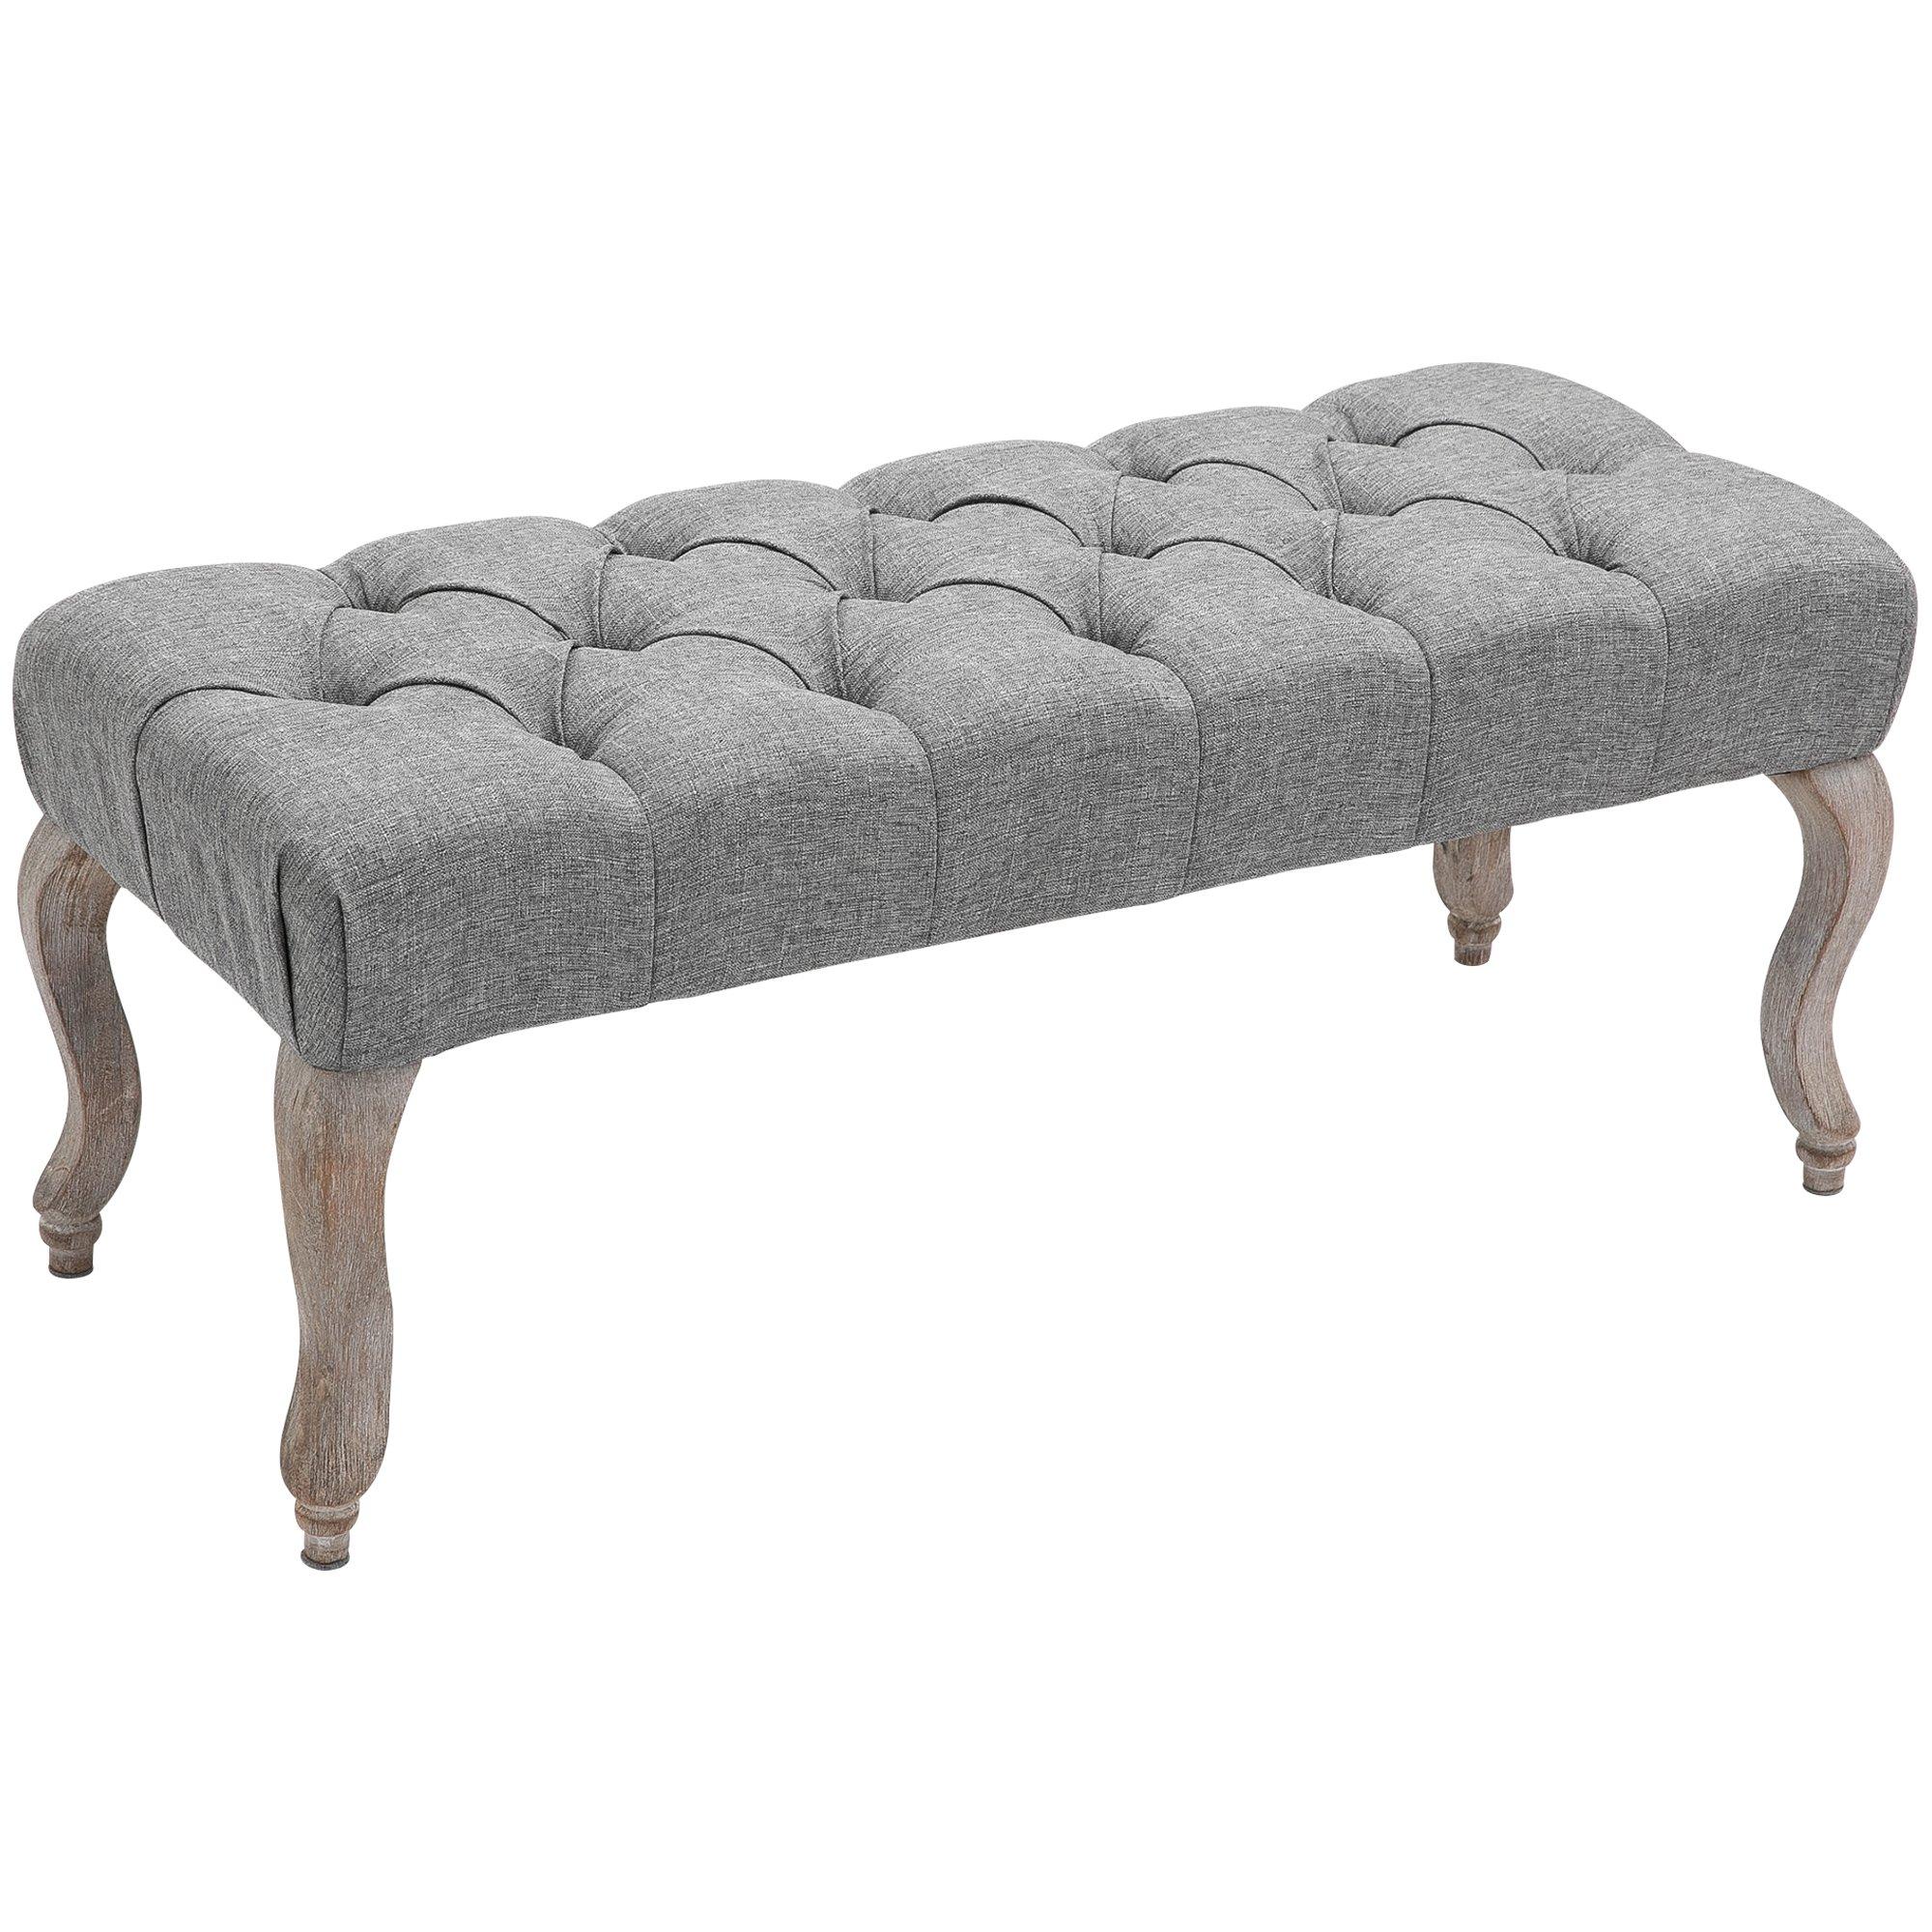 Tufted Upholstered Accent Bench Window Seat Fabric Ottoman Bed